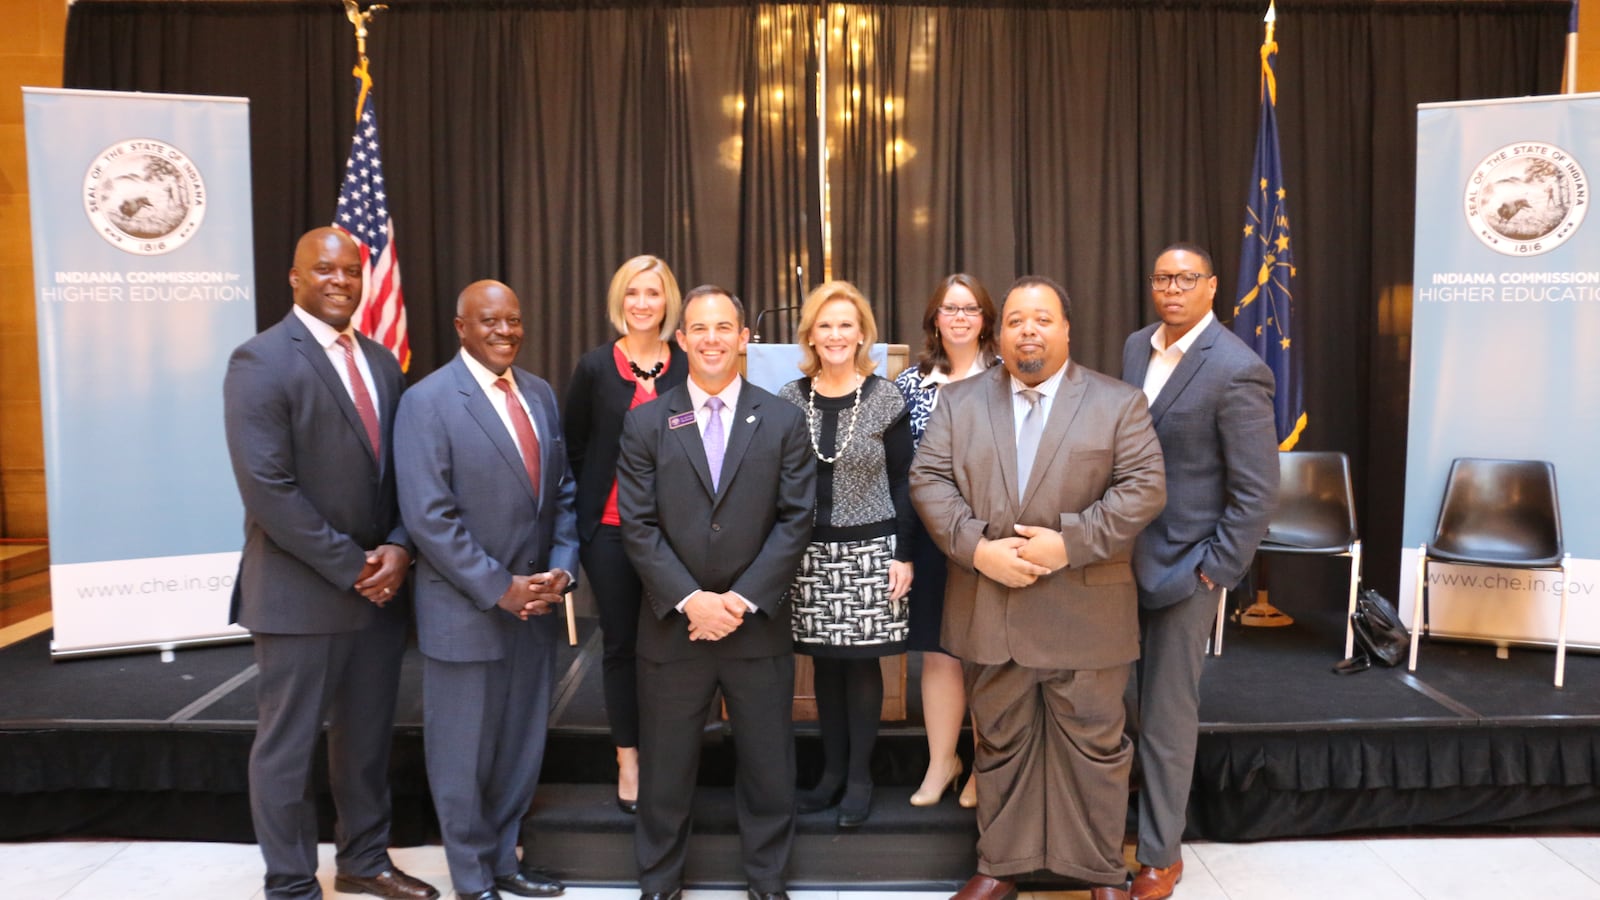 Representatives from Indiana University, the Indiana Black Expo and the Indiana Commission for Higher Education at the announcement Monday.